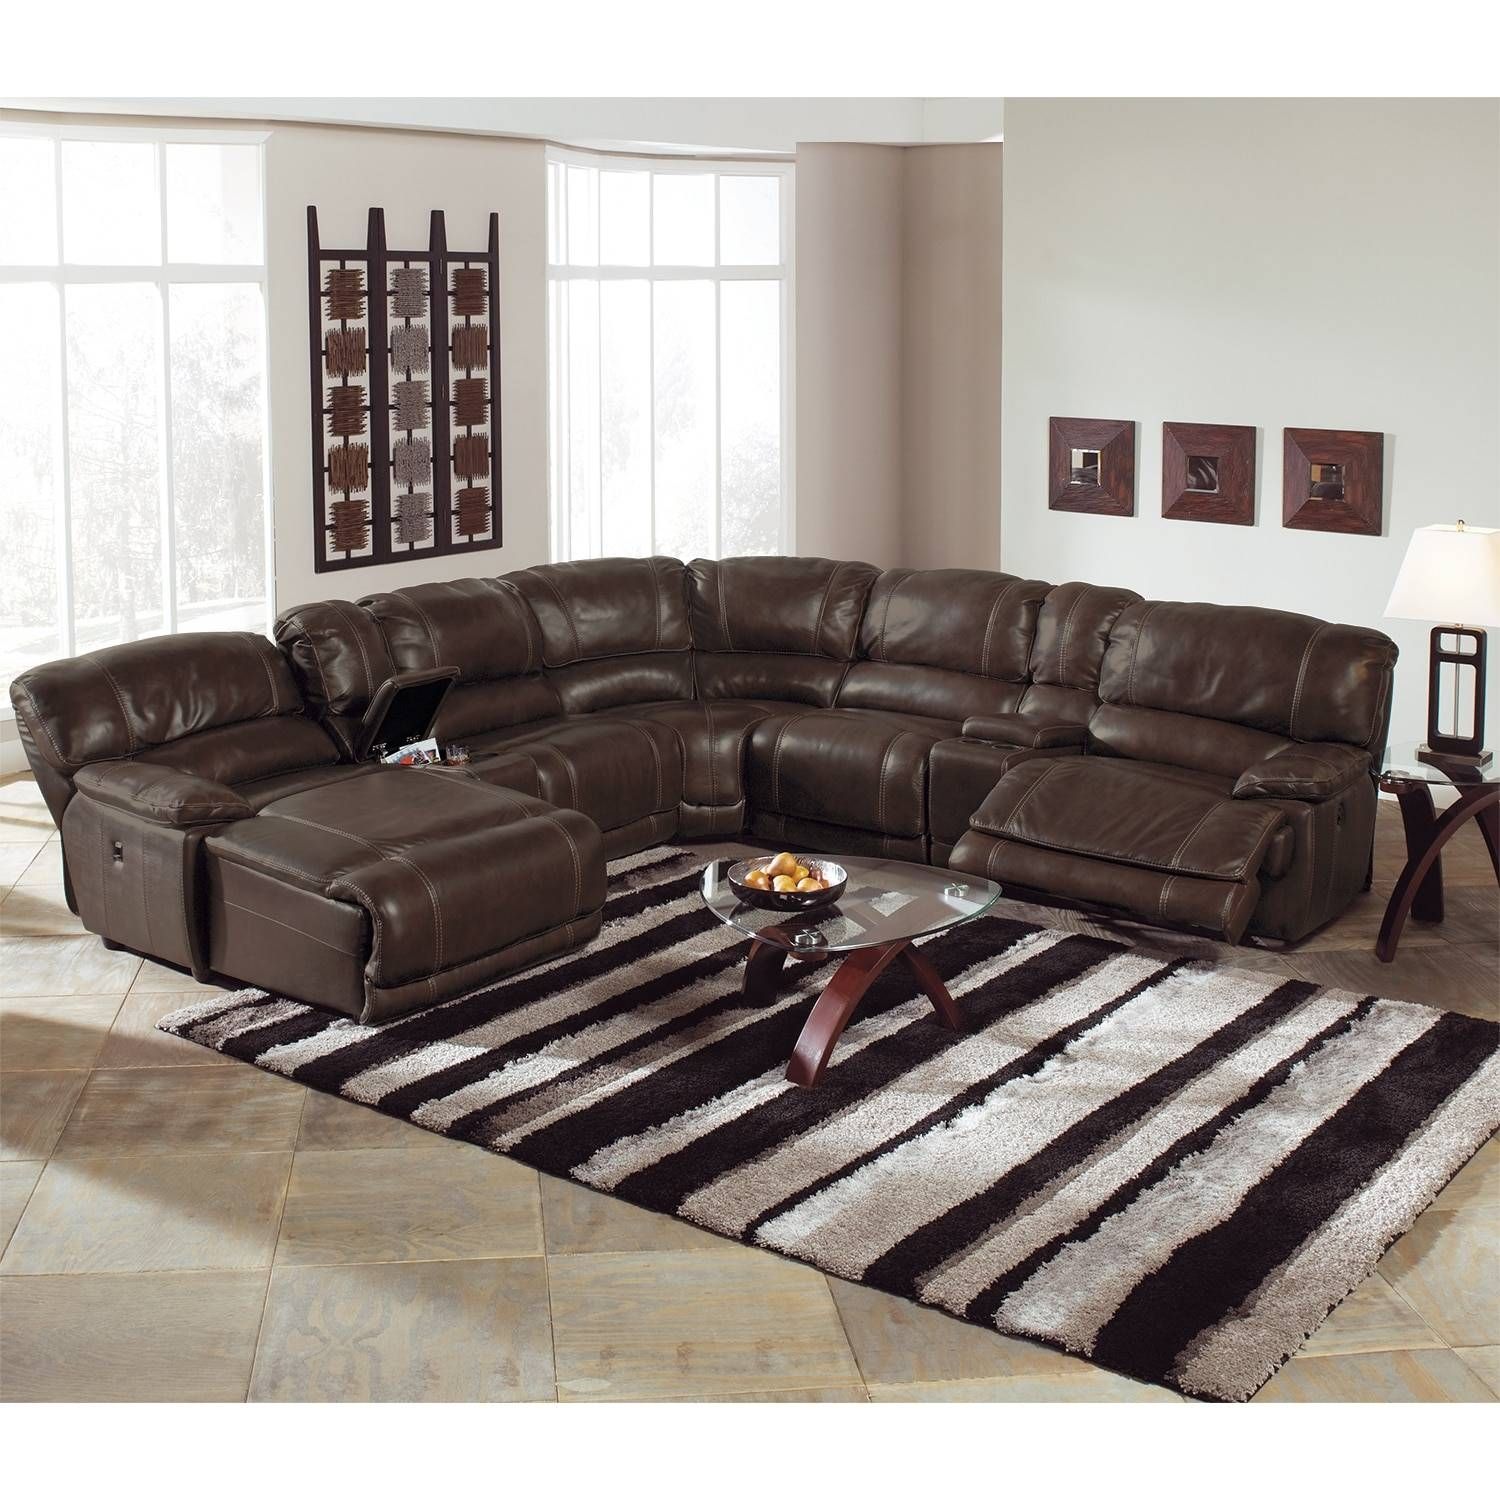 Furniture: Pretty Slipcovered Sectional Sofa For Comfy Your Living Regarding 3 Piece Sectional Sofa Slipcovers (View 25 of 33)